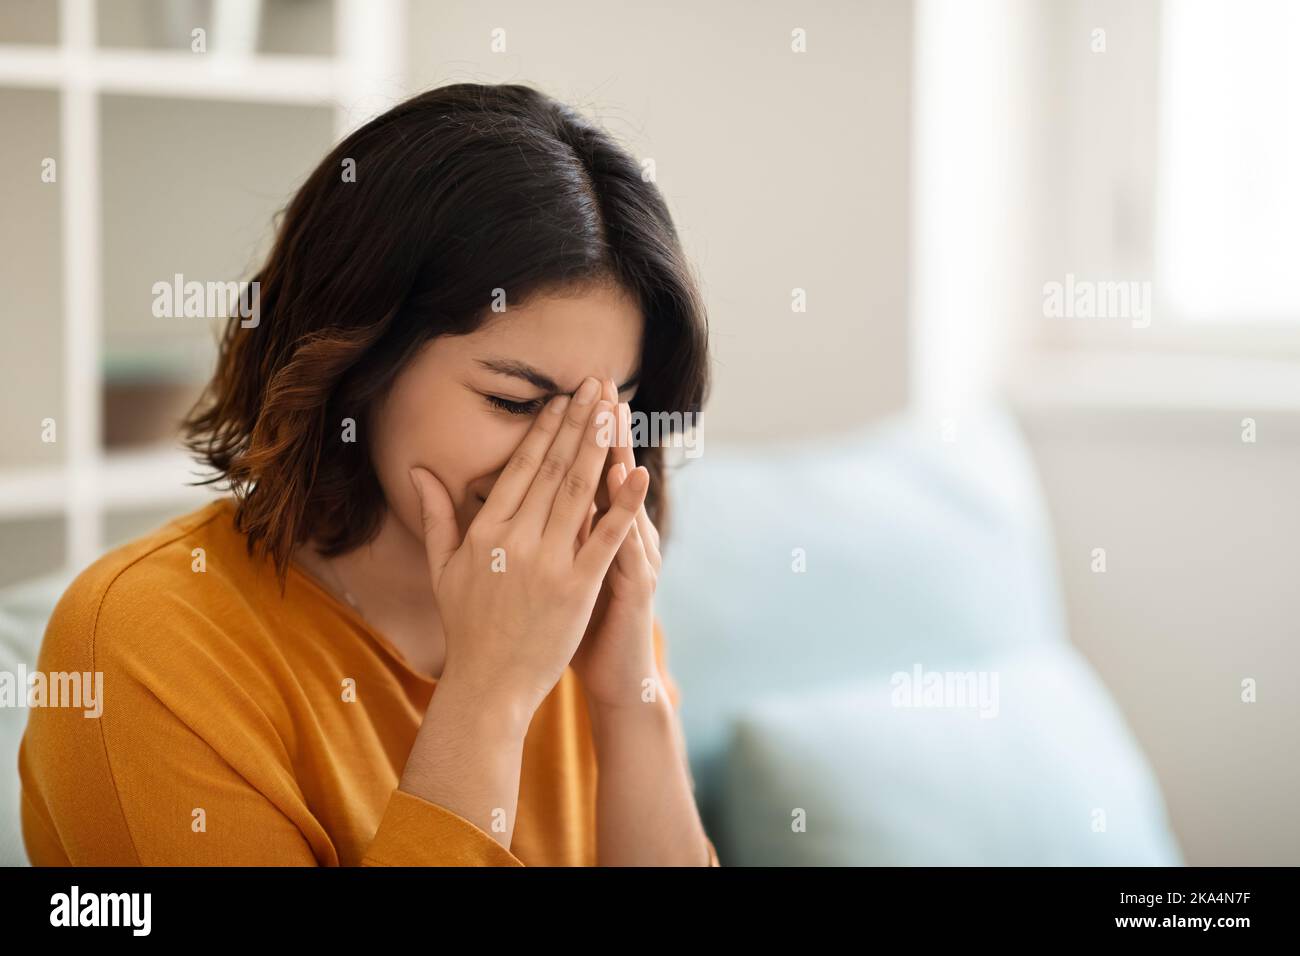 Depression Concept. Portrait Of Young Arab Woman Crying While Sitting At Home Stock Photo